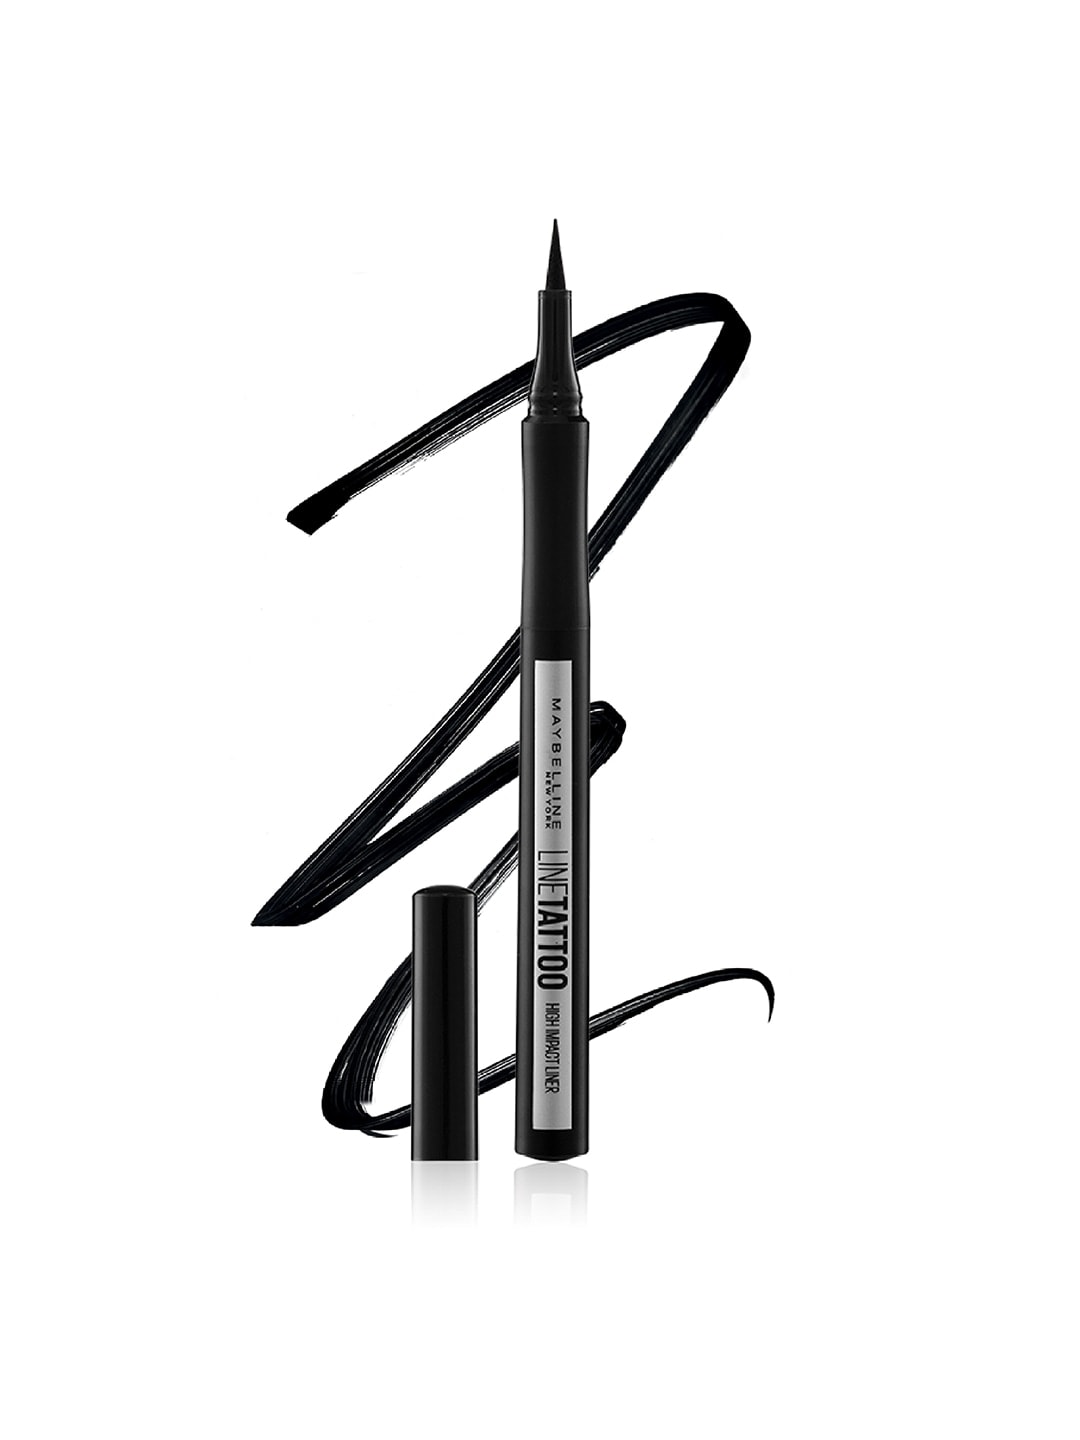 Maybelline New York Line Tattoo High Impact Liner - Intense Black Price in India